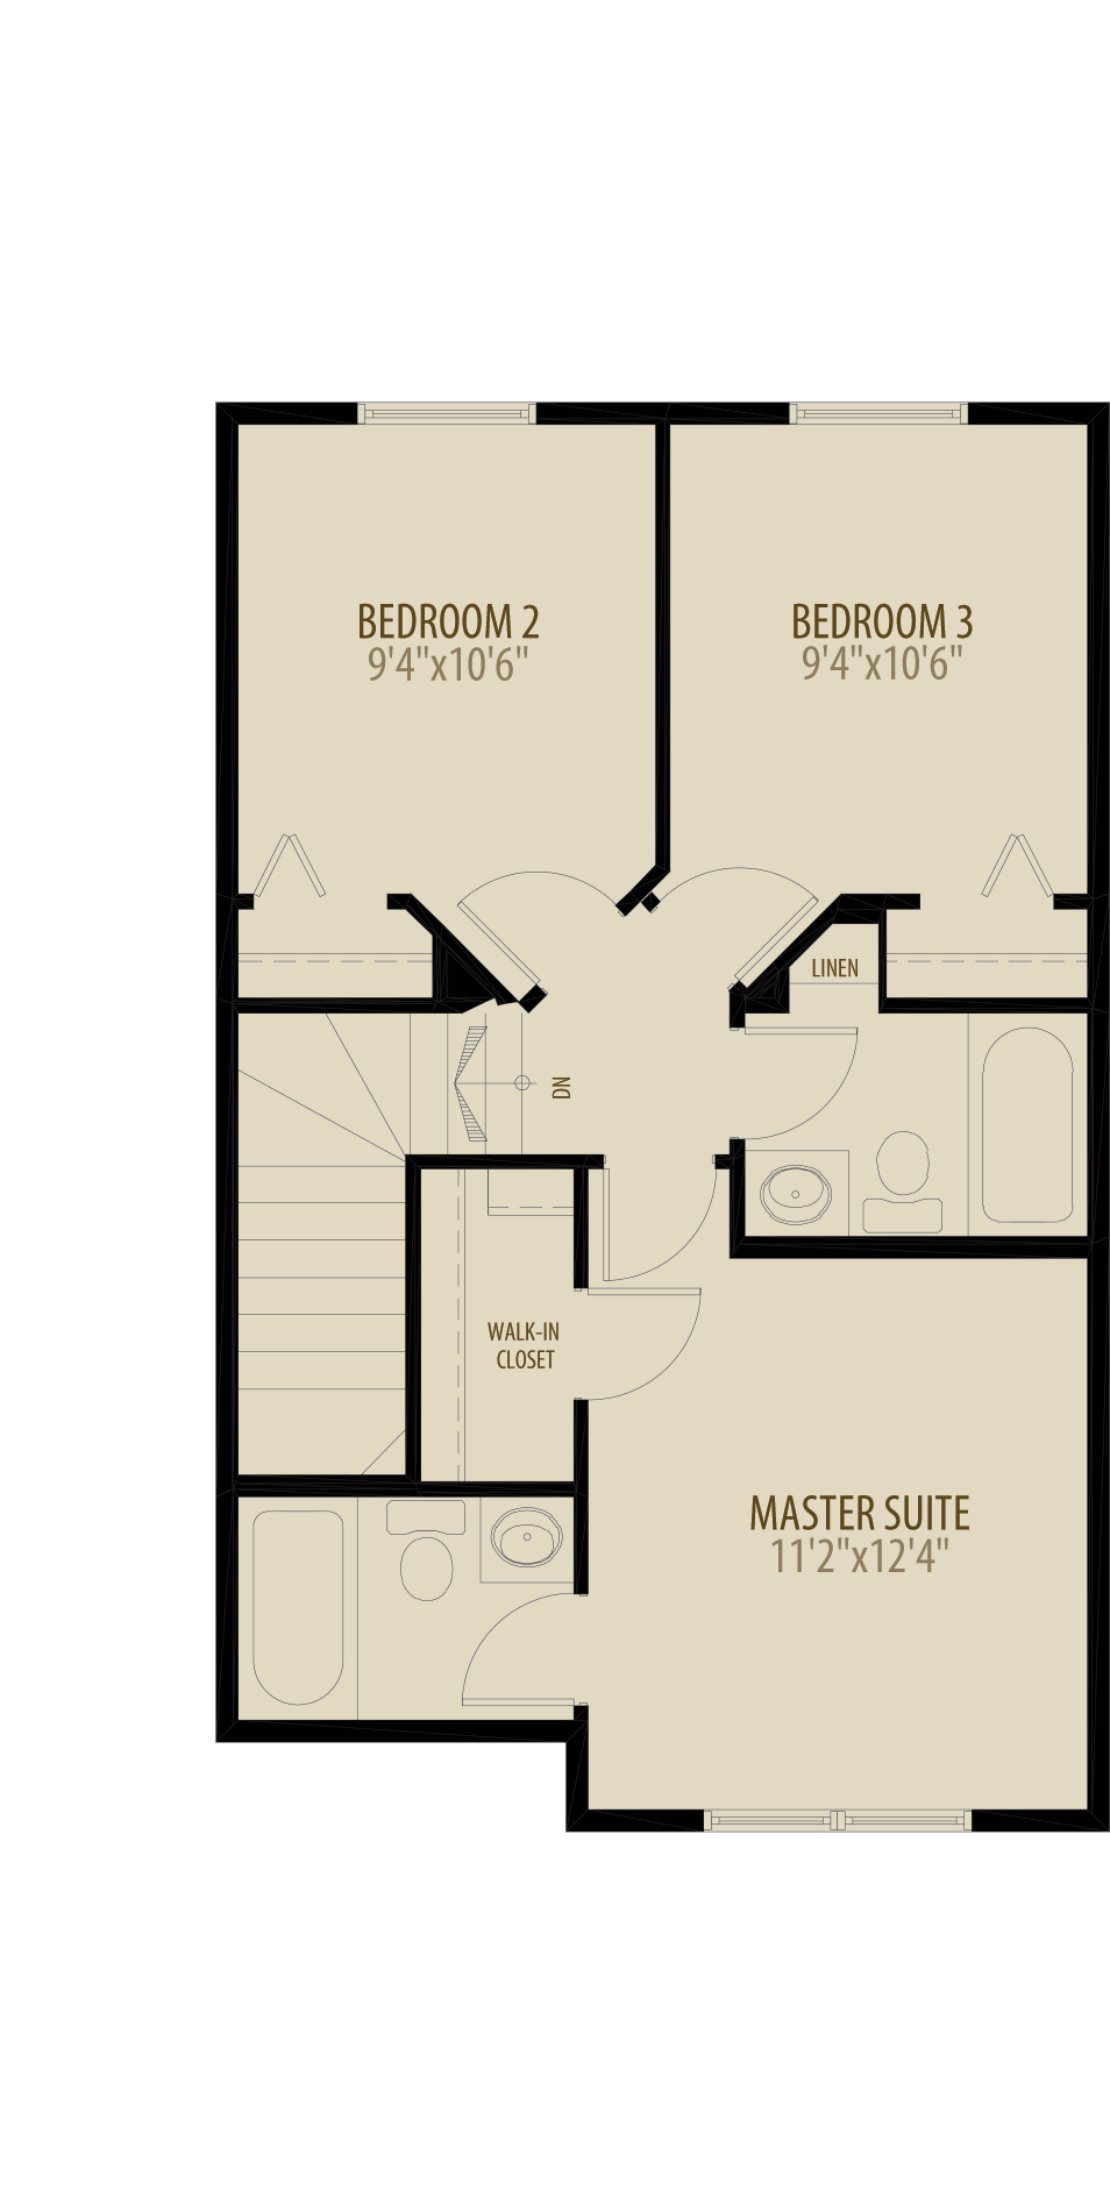 Expanded Bedrooms Adds 32Sq Ft